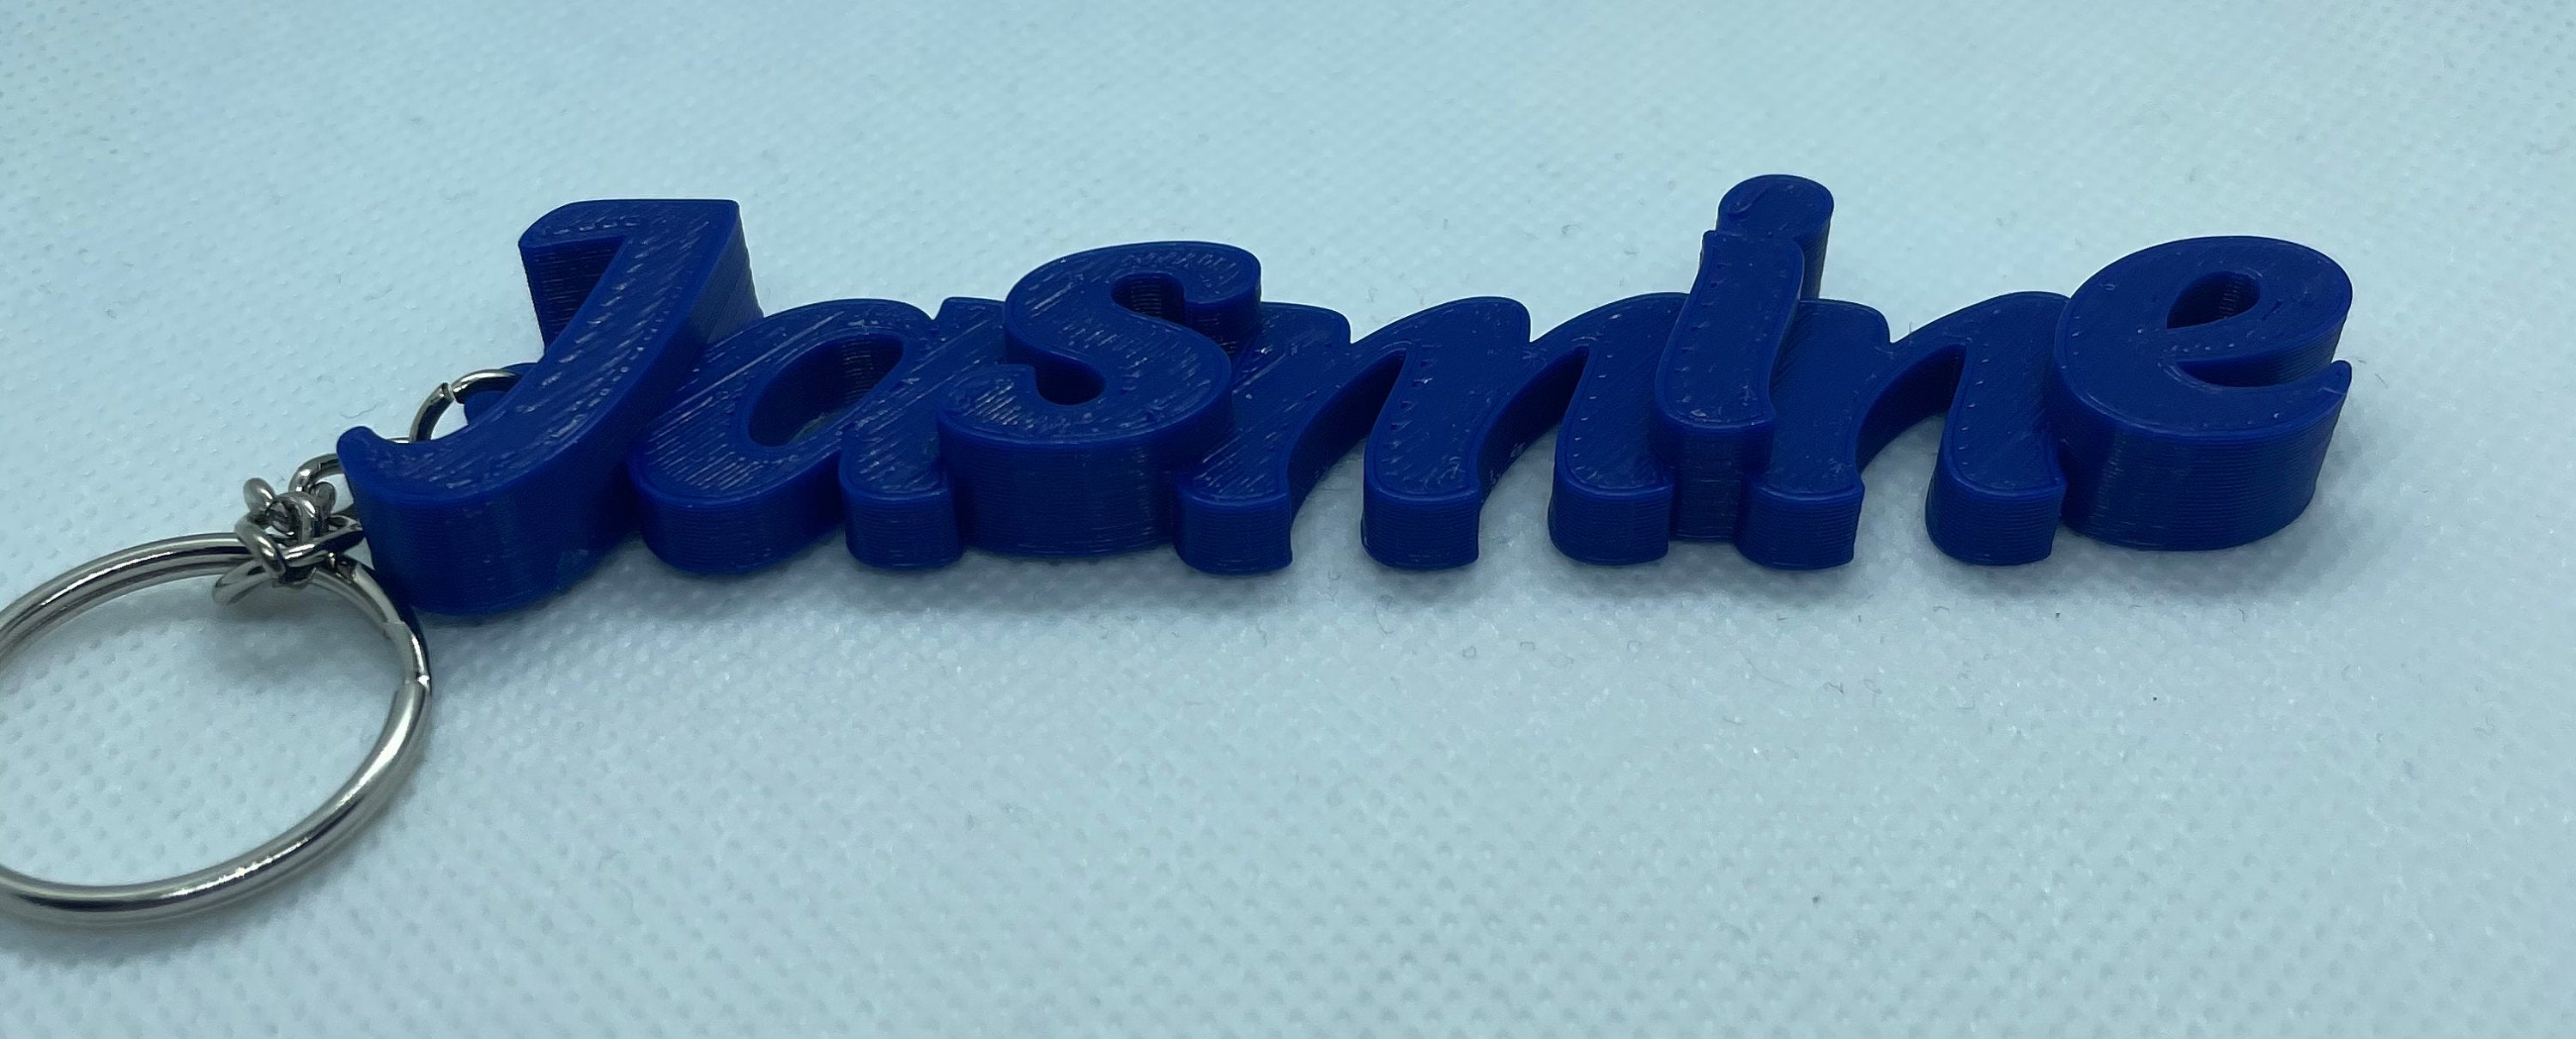 Personalised Keyring - Keychain - Gift 3D Printed, Under 5 pounds, –  JC3DDESIGN